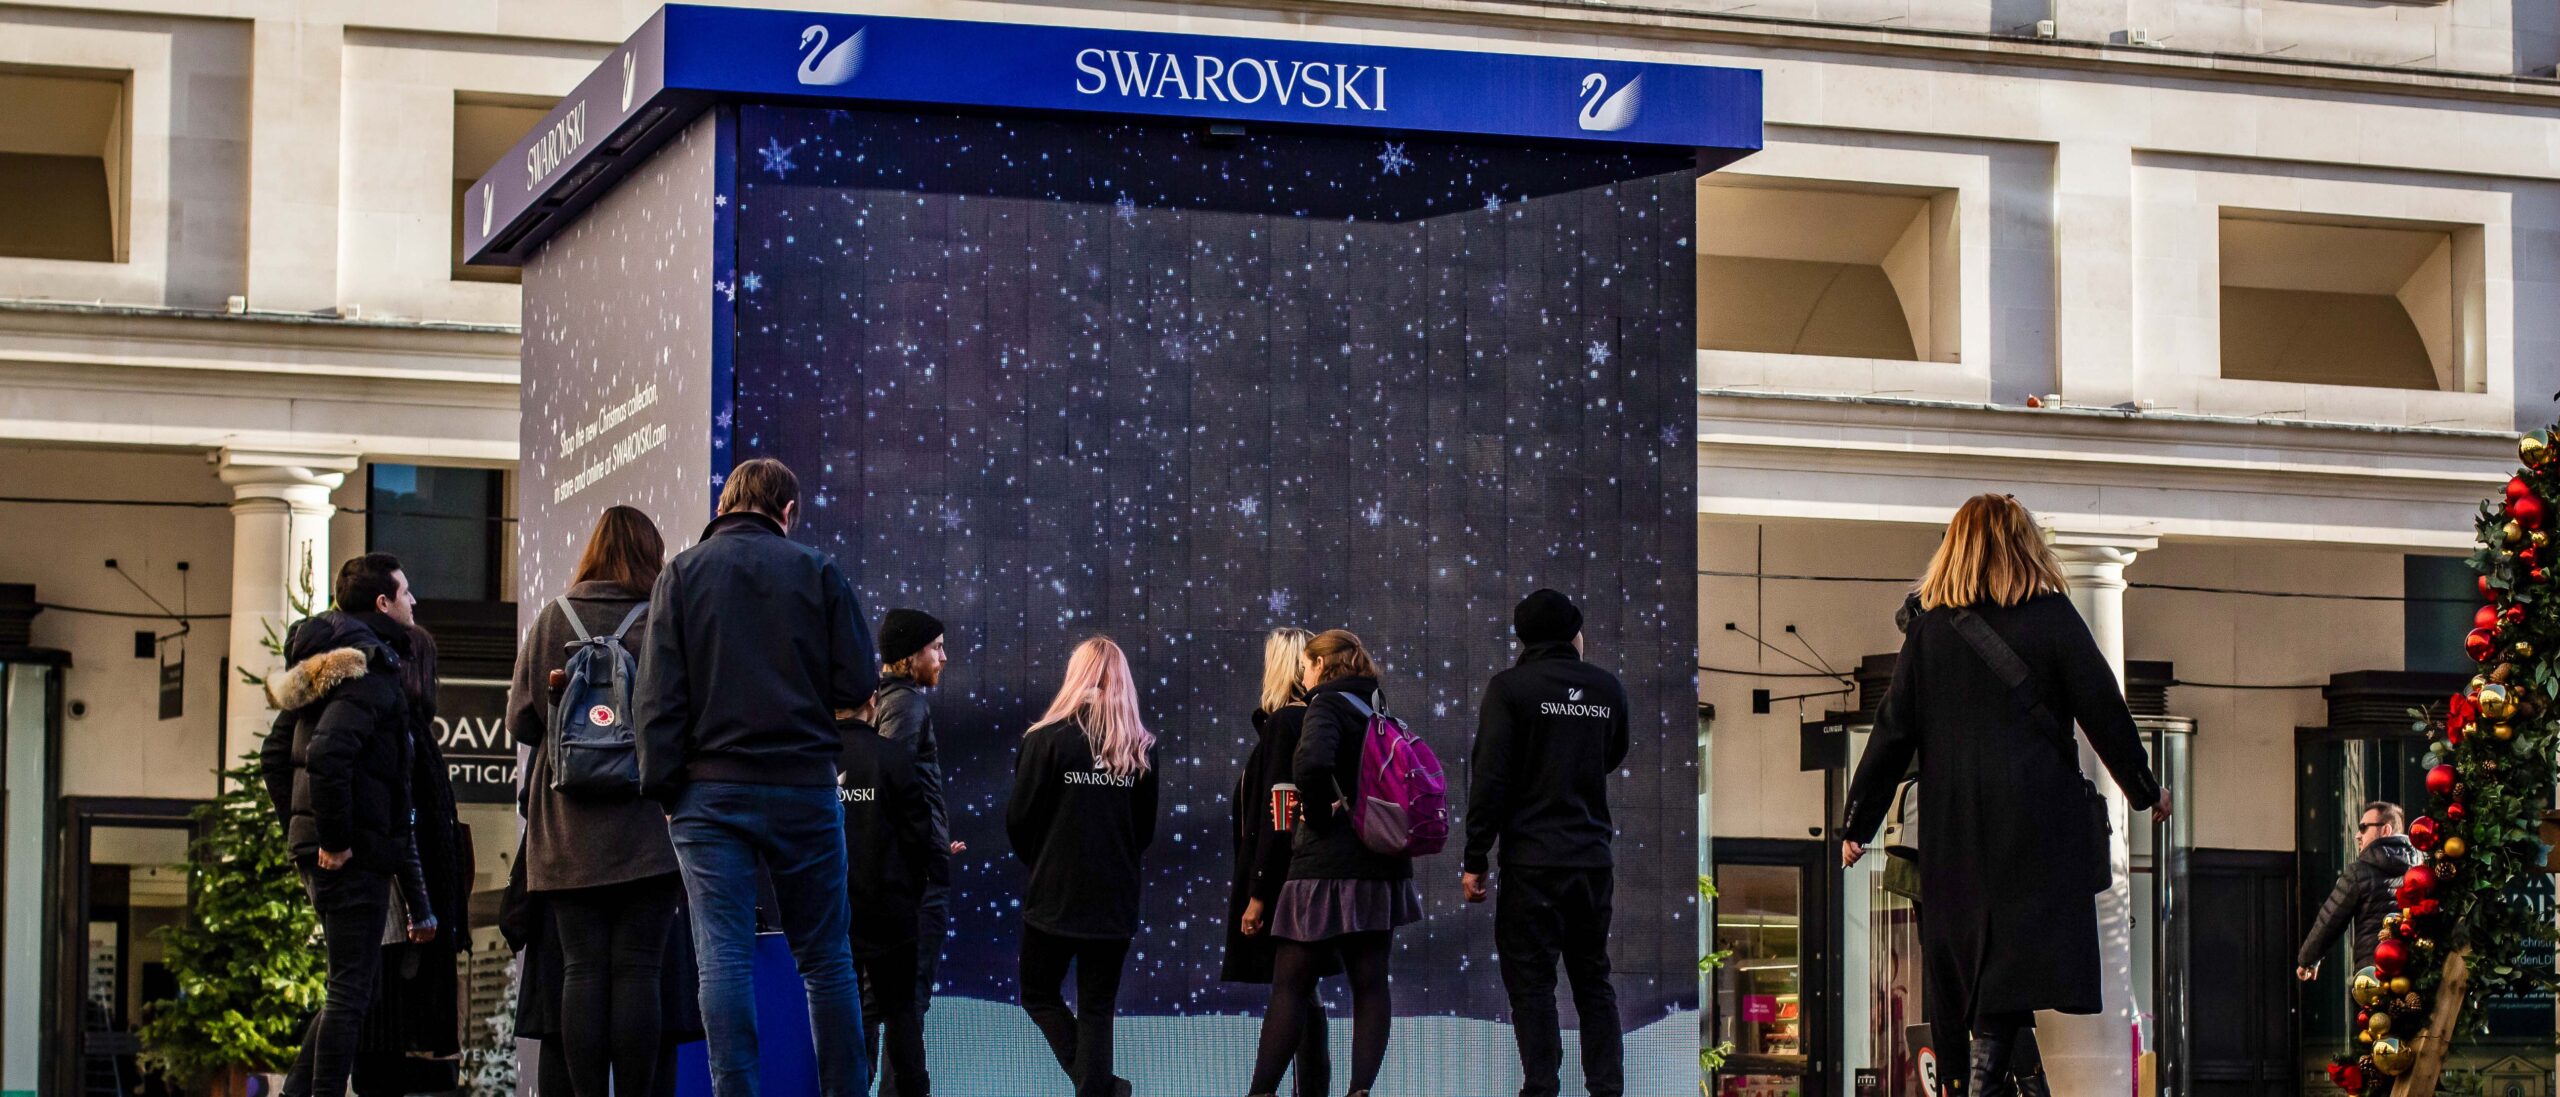 Swarovski event staff around the Experiential LED cube in Covert Garden